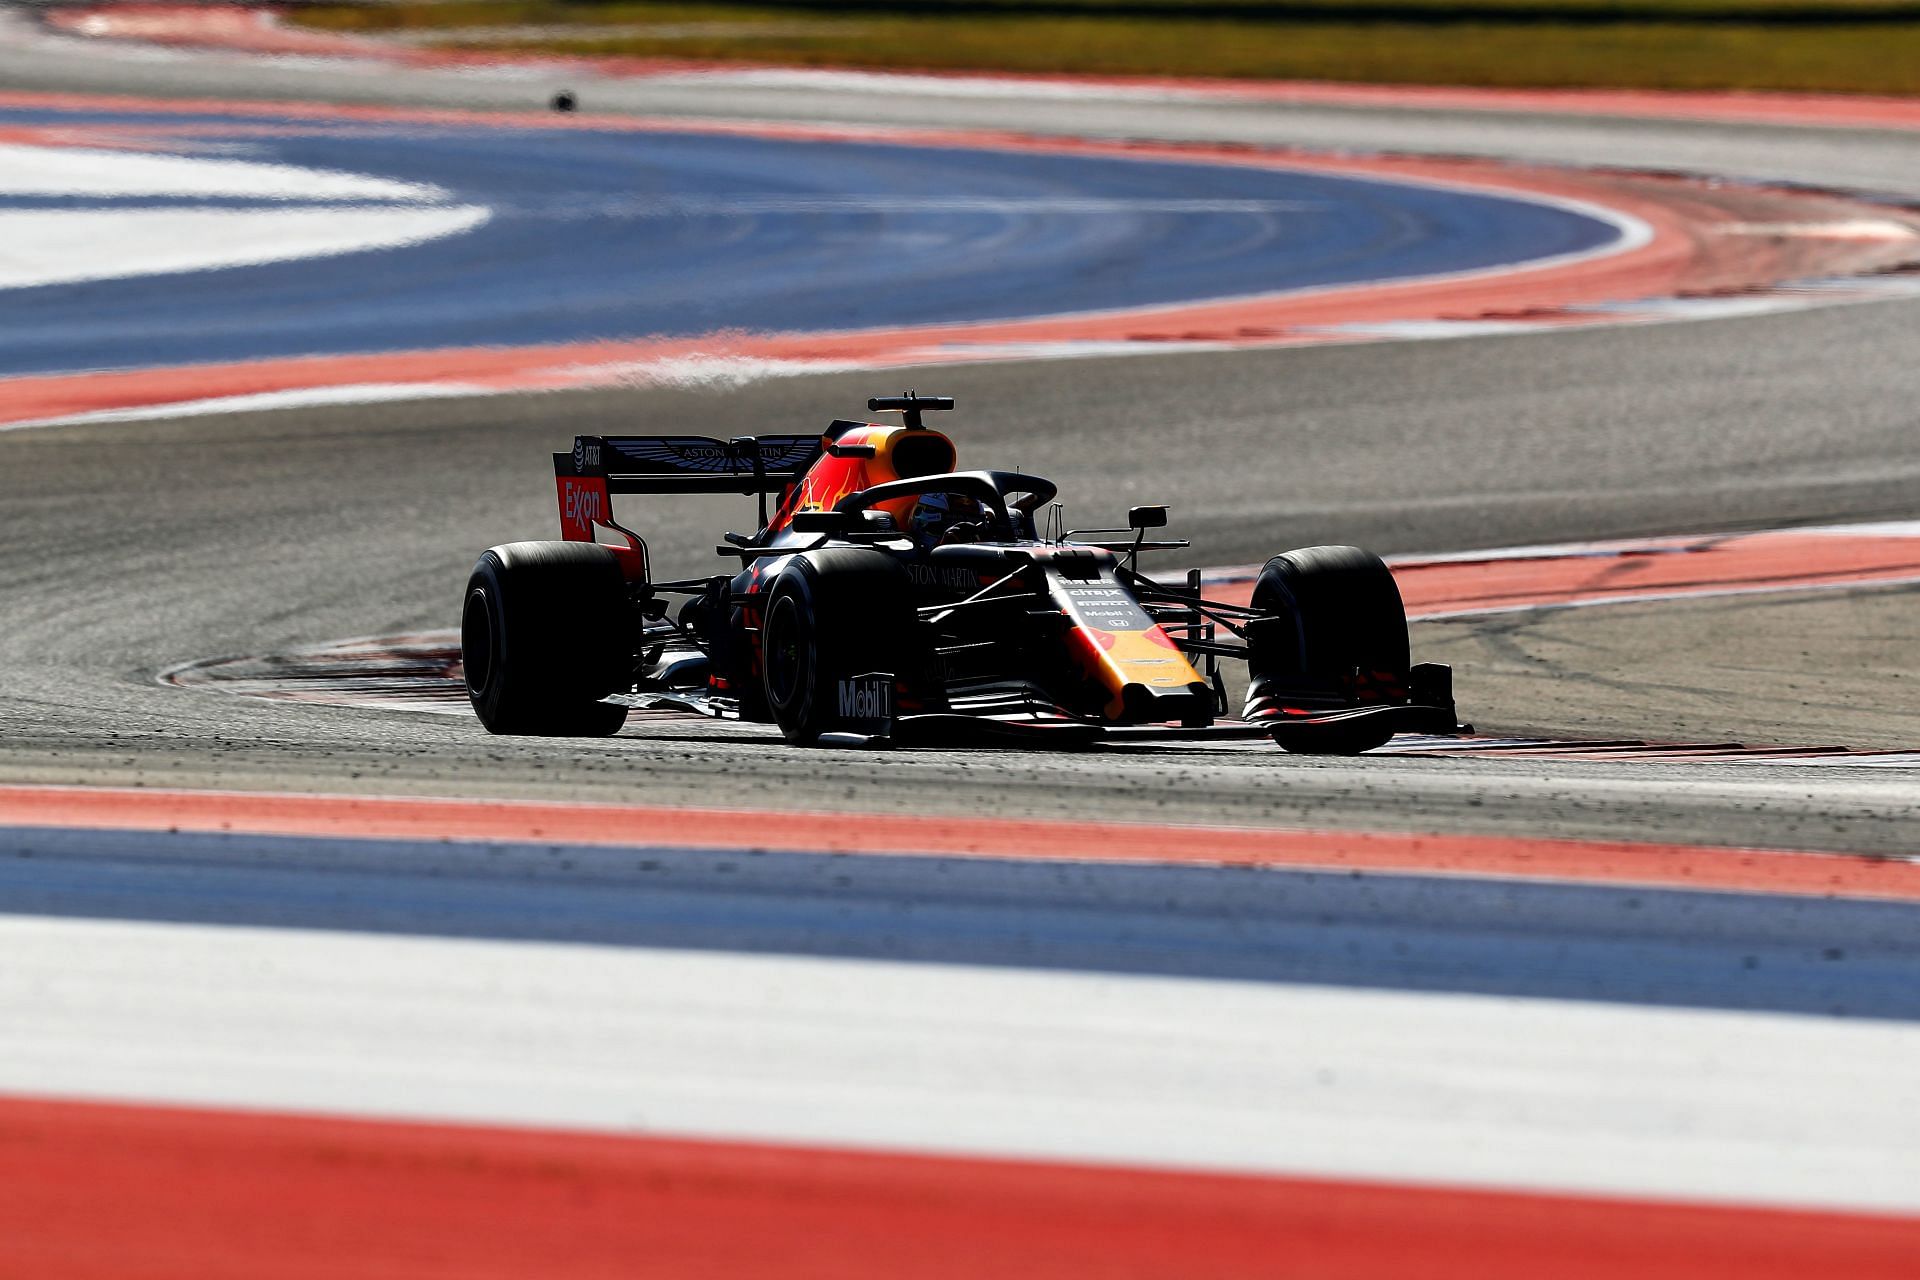 Max Verstappen driving the (33) Aston Martin Red Bull Racing RB15 on track during 2019 US Grand Prix. (Photo by Mark Thompson/Getty Images)